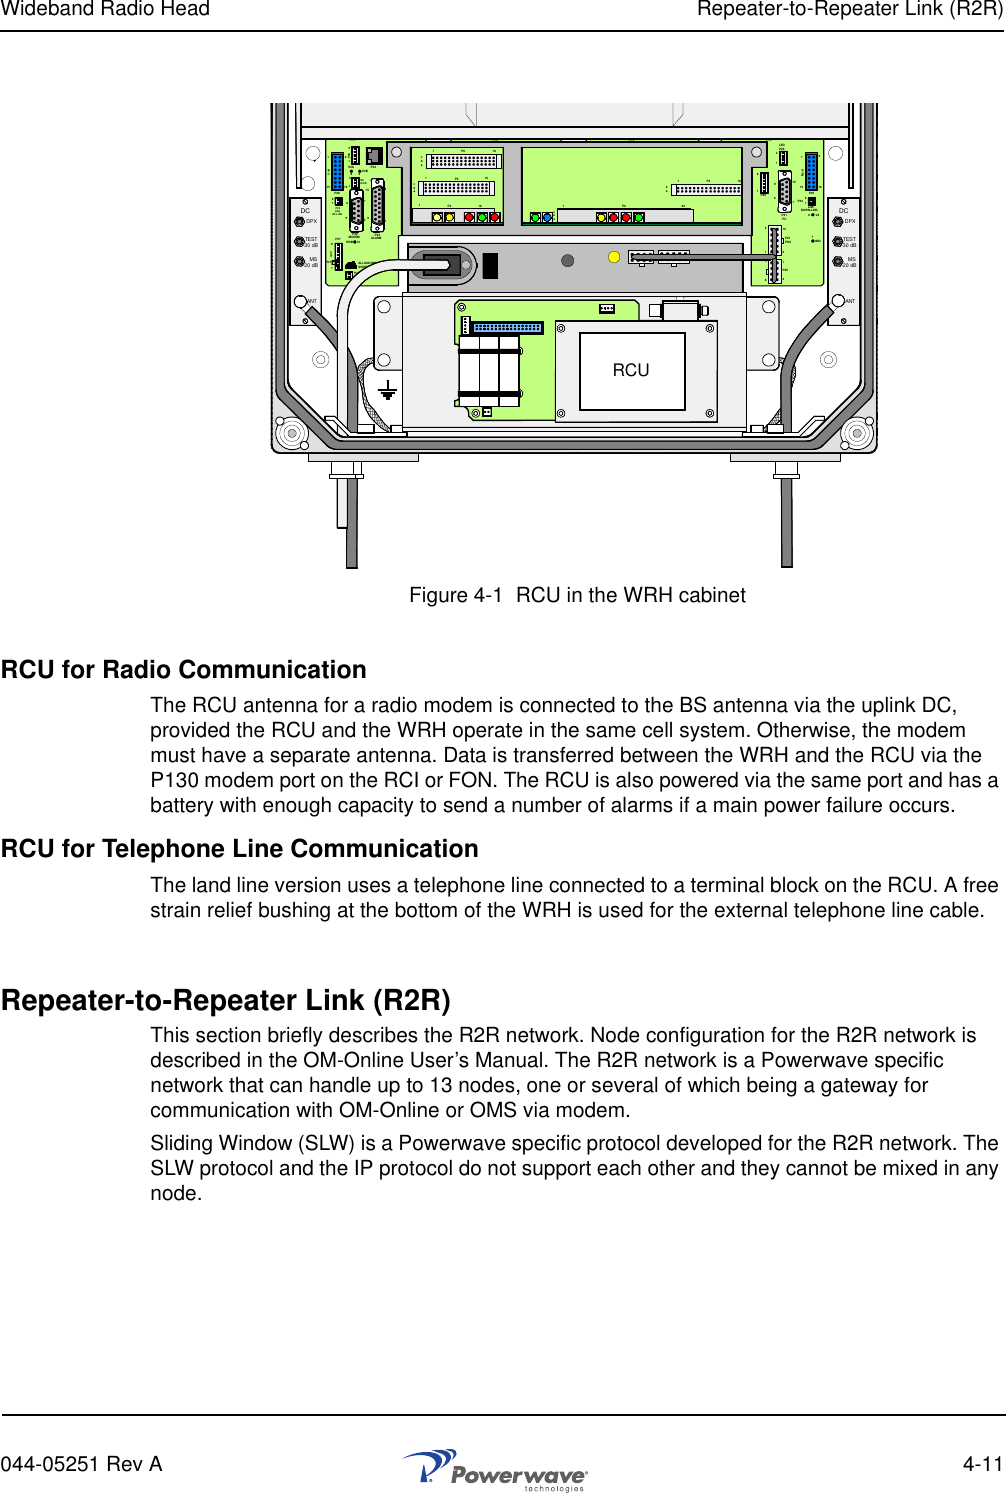 Wideband Radio Head Repeater-to-Repeater Link (R2R)044-05251 Rev A 4-11Figure 4-1  RCU in the WRH cabinetRCU for Radio CommunicationThe RCU antenna for a radio modem is connected to the BS antenna via the uplink DC, provided the RCU and the WRH operate in the same cell system. Otherwise, the modem must have a separate antenna. Data is transferred between the WRH and the RCU via the P130 modem port on the RCI or FON. The RCU is also powered via the same port and has a battery with enough capacity to send a number of alarms if a main power failure occurs.RCU for Telephone Line CommunicationThe land line version uses a telephone line connected to a terminal block on the RCU. A free strain relief bushing at the bottom of the WRH is used for the external telephone line cable.Repeater-to-Repeater Link (R2R)This section briefly describes the R2R network. Node configuration for the R2R network is described in the OM-Online User’s Manual. The R2R network is a Powerwave specific network that can handle up to 13 nodes, one or several of which being a gateway for communication with OM-Online or OMS via modem.Sliding Window (SLW) is a Powerwave specific protocol developed for the R2R network. The SLW protocol and the IP protocol do not support each other and they cannot be mixed in any node.MSDPXANTTESTDC-30 dB-20 dB MSDPXANTTESTDC-30 dB-20 dBALLGON INNOV ATIONSWEDEN         M105 R61PARKINGFOR W 5W58P27 W6B 101P33ALARMP23LNAUP-LINKP32MODEMAUX1P28DOOR596111611M-&gt;SP11P348915P2615 16S-&gt;M12389P365X0AX0B2V2 116P12 P13111161616P4P5P6cbacbacbacba1P2321ba116P316 116P141V111111461156915216124585P35P21PSU610P31PCP29P24P25GND76V6LNADOWN- LINKLEDP2212POWER SUPPLY UNITRCU